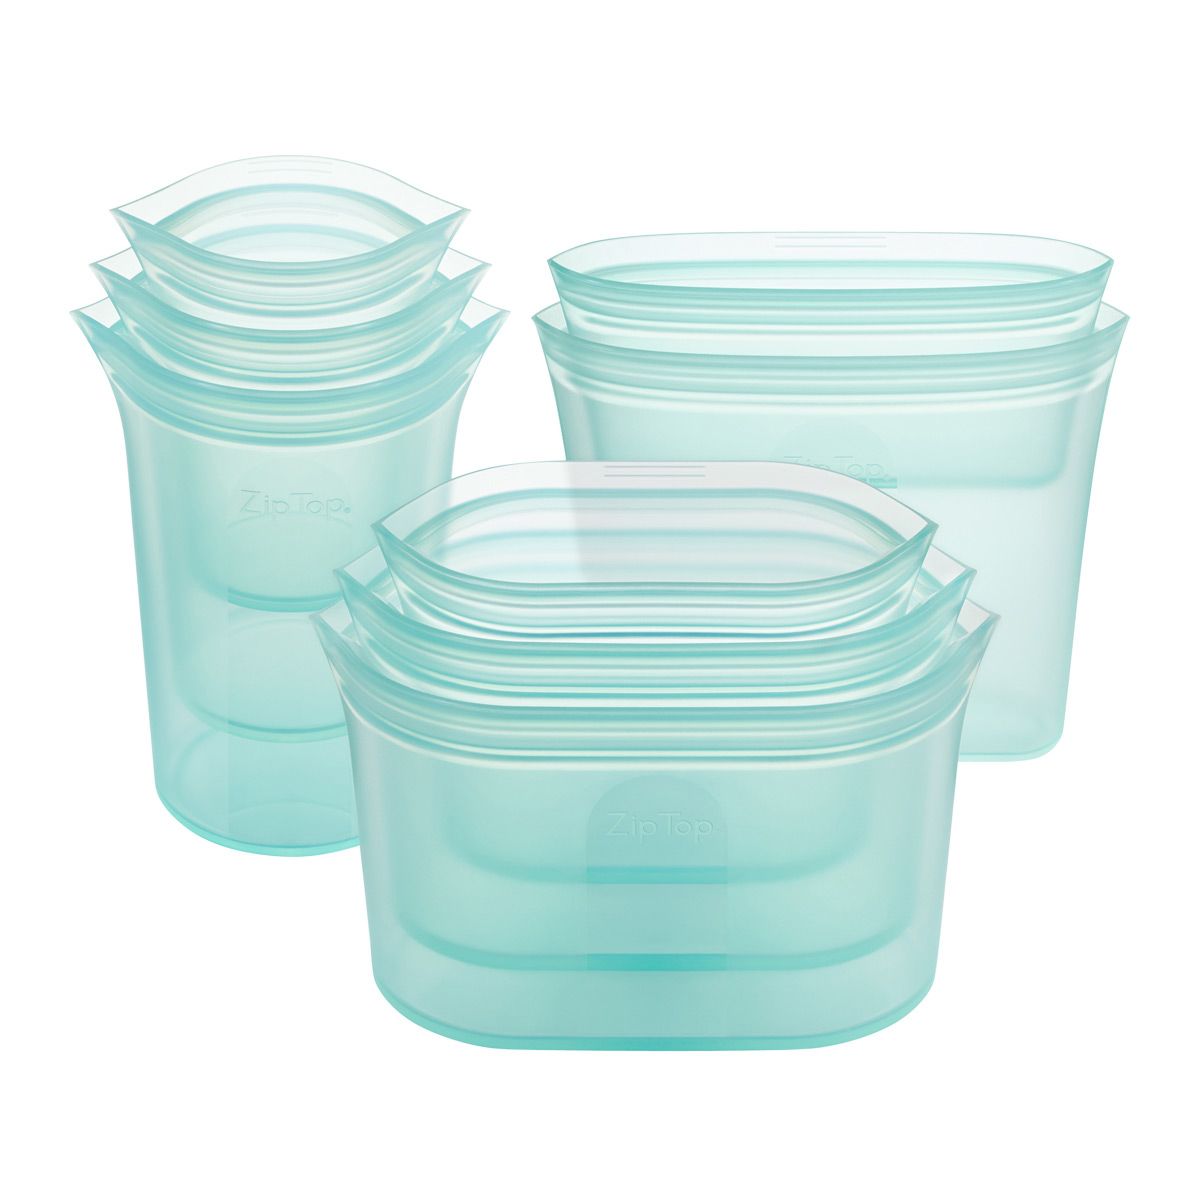 Zip Top Reusable Silicone Containers Full Set of 8 | The Container Store